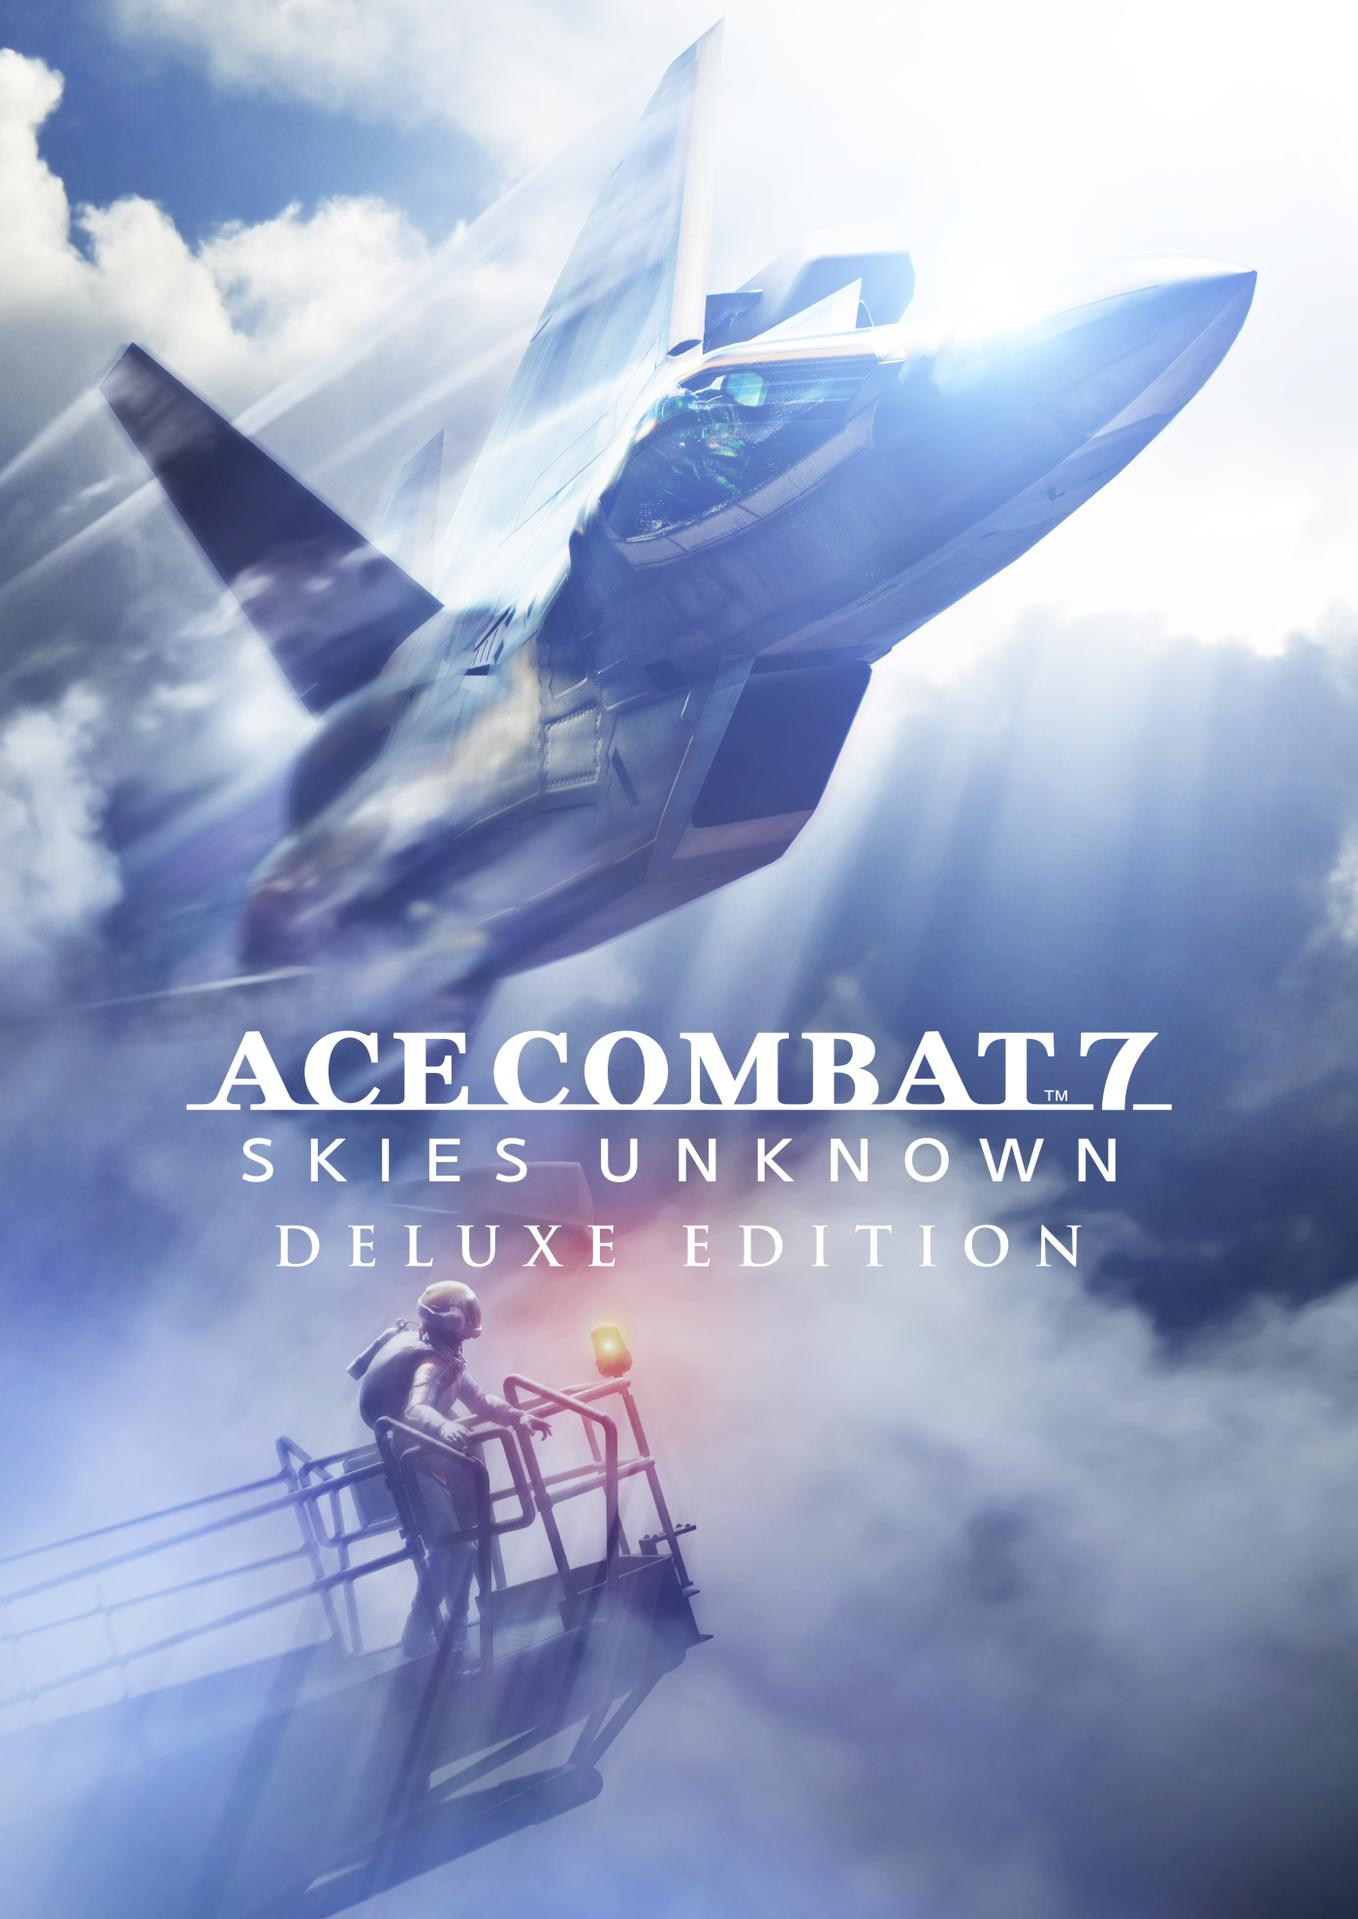 Ace Combat Skies 7: Switch] - Edition) (Deluxe [Nintendo Unknown